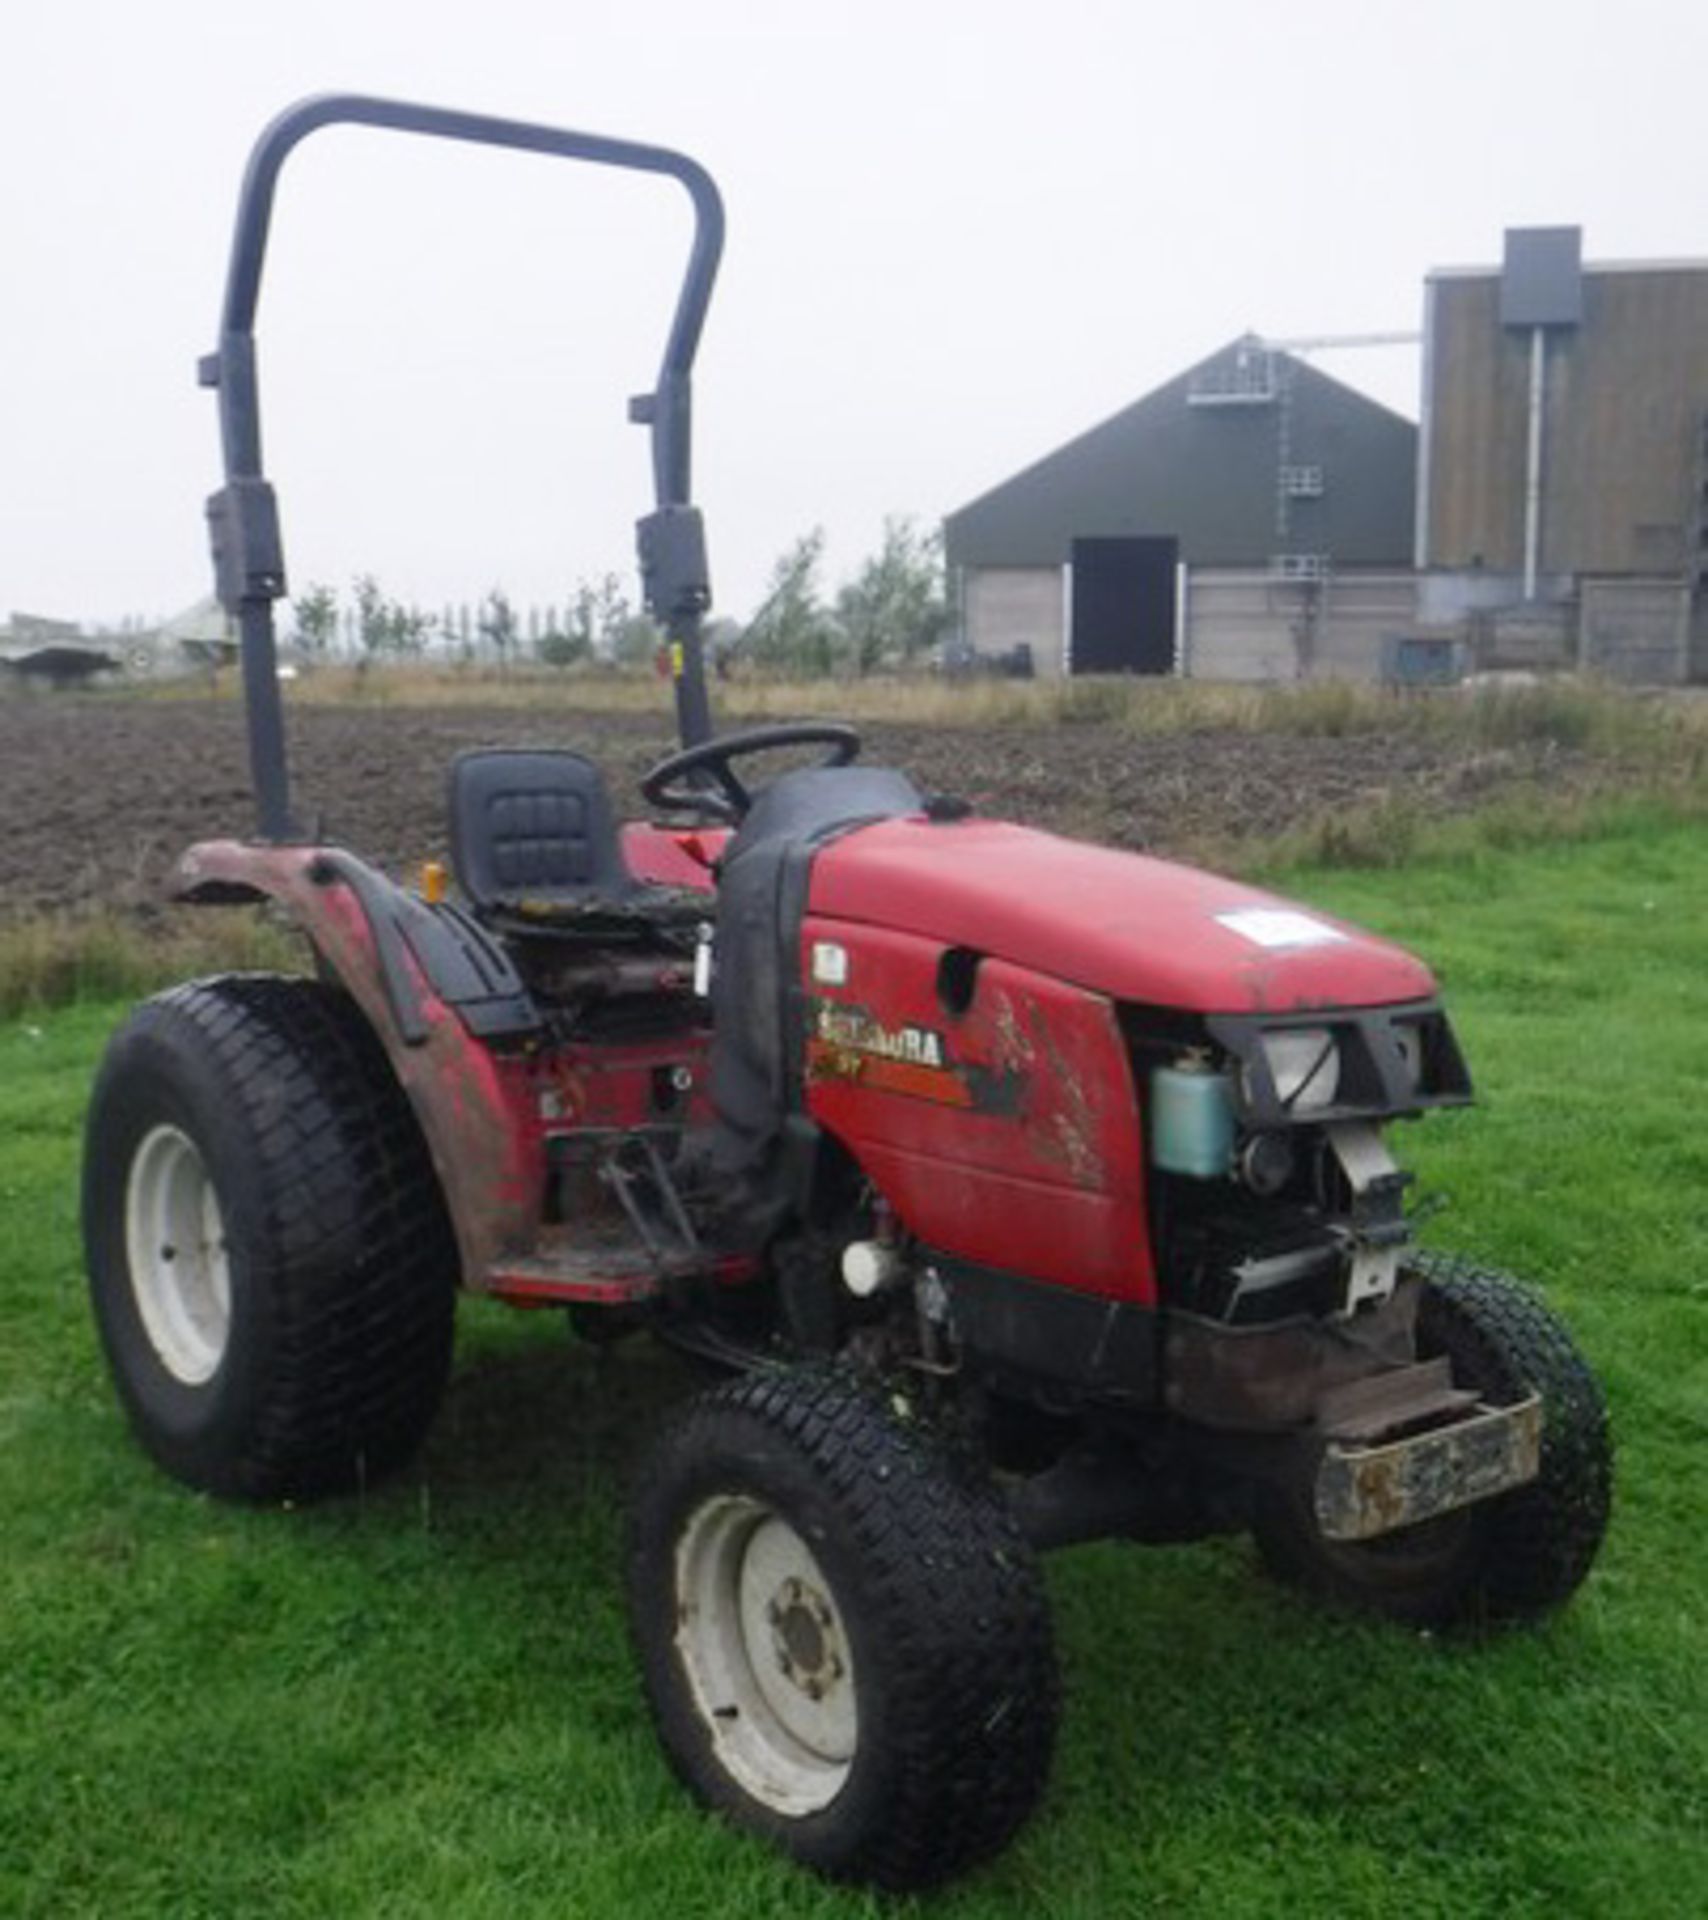 2011 SHIBAURA ST-333 compact tractor. S/N 21196, 2373hrs (not verified) - Image 3 of 11